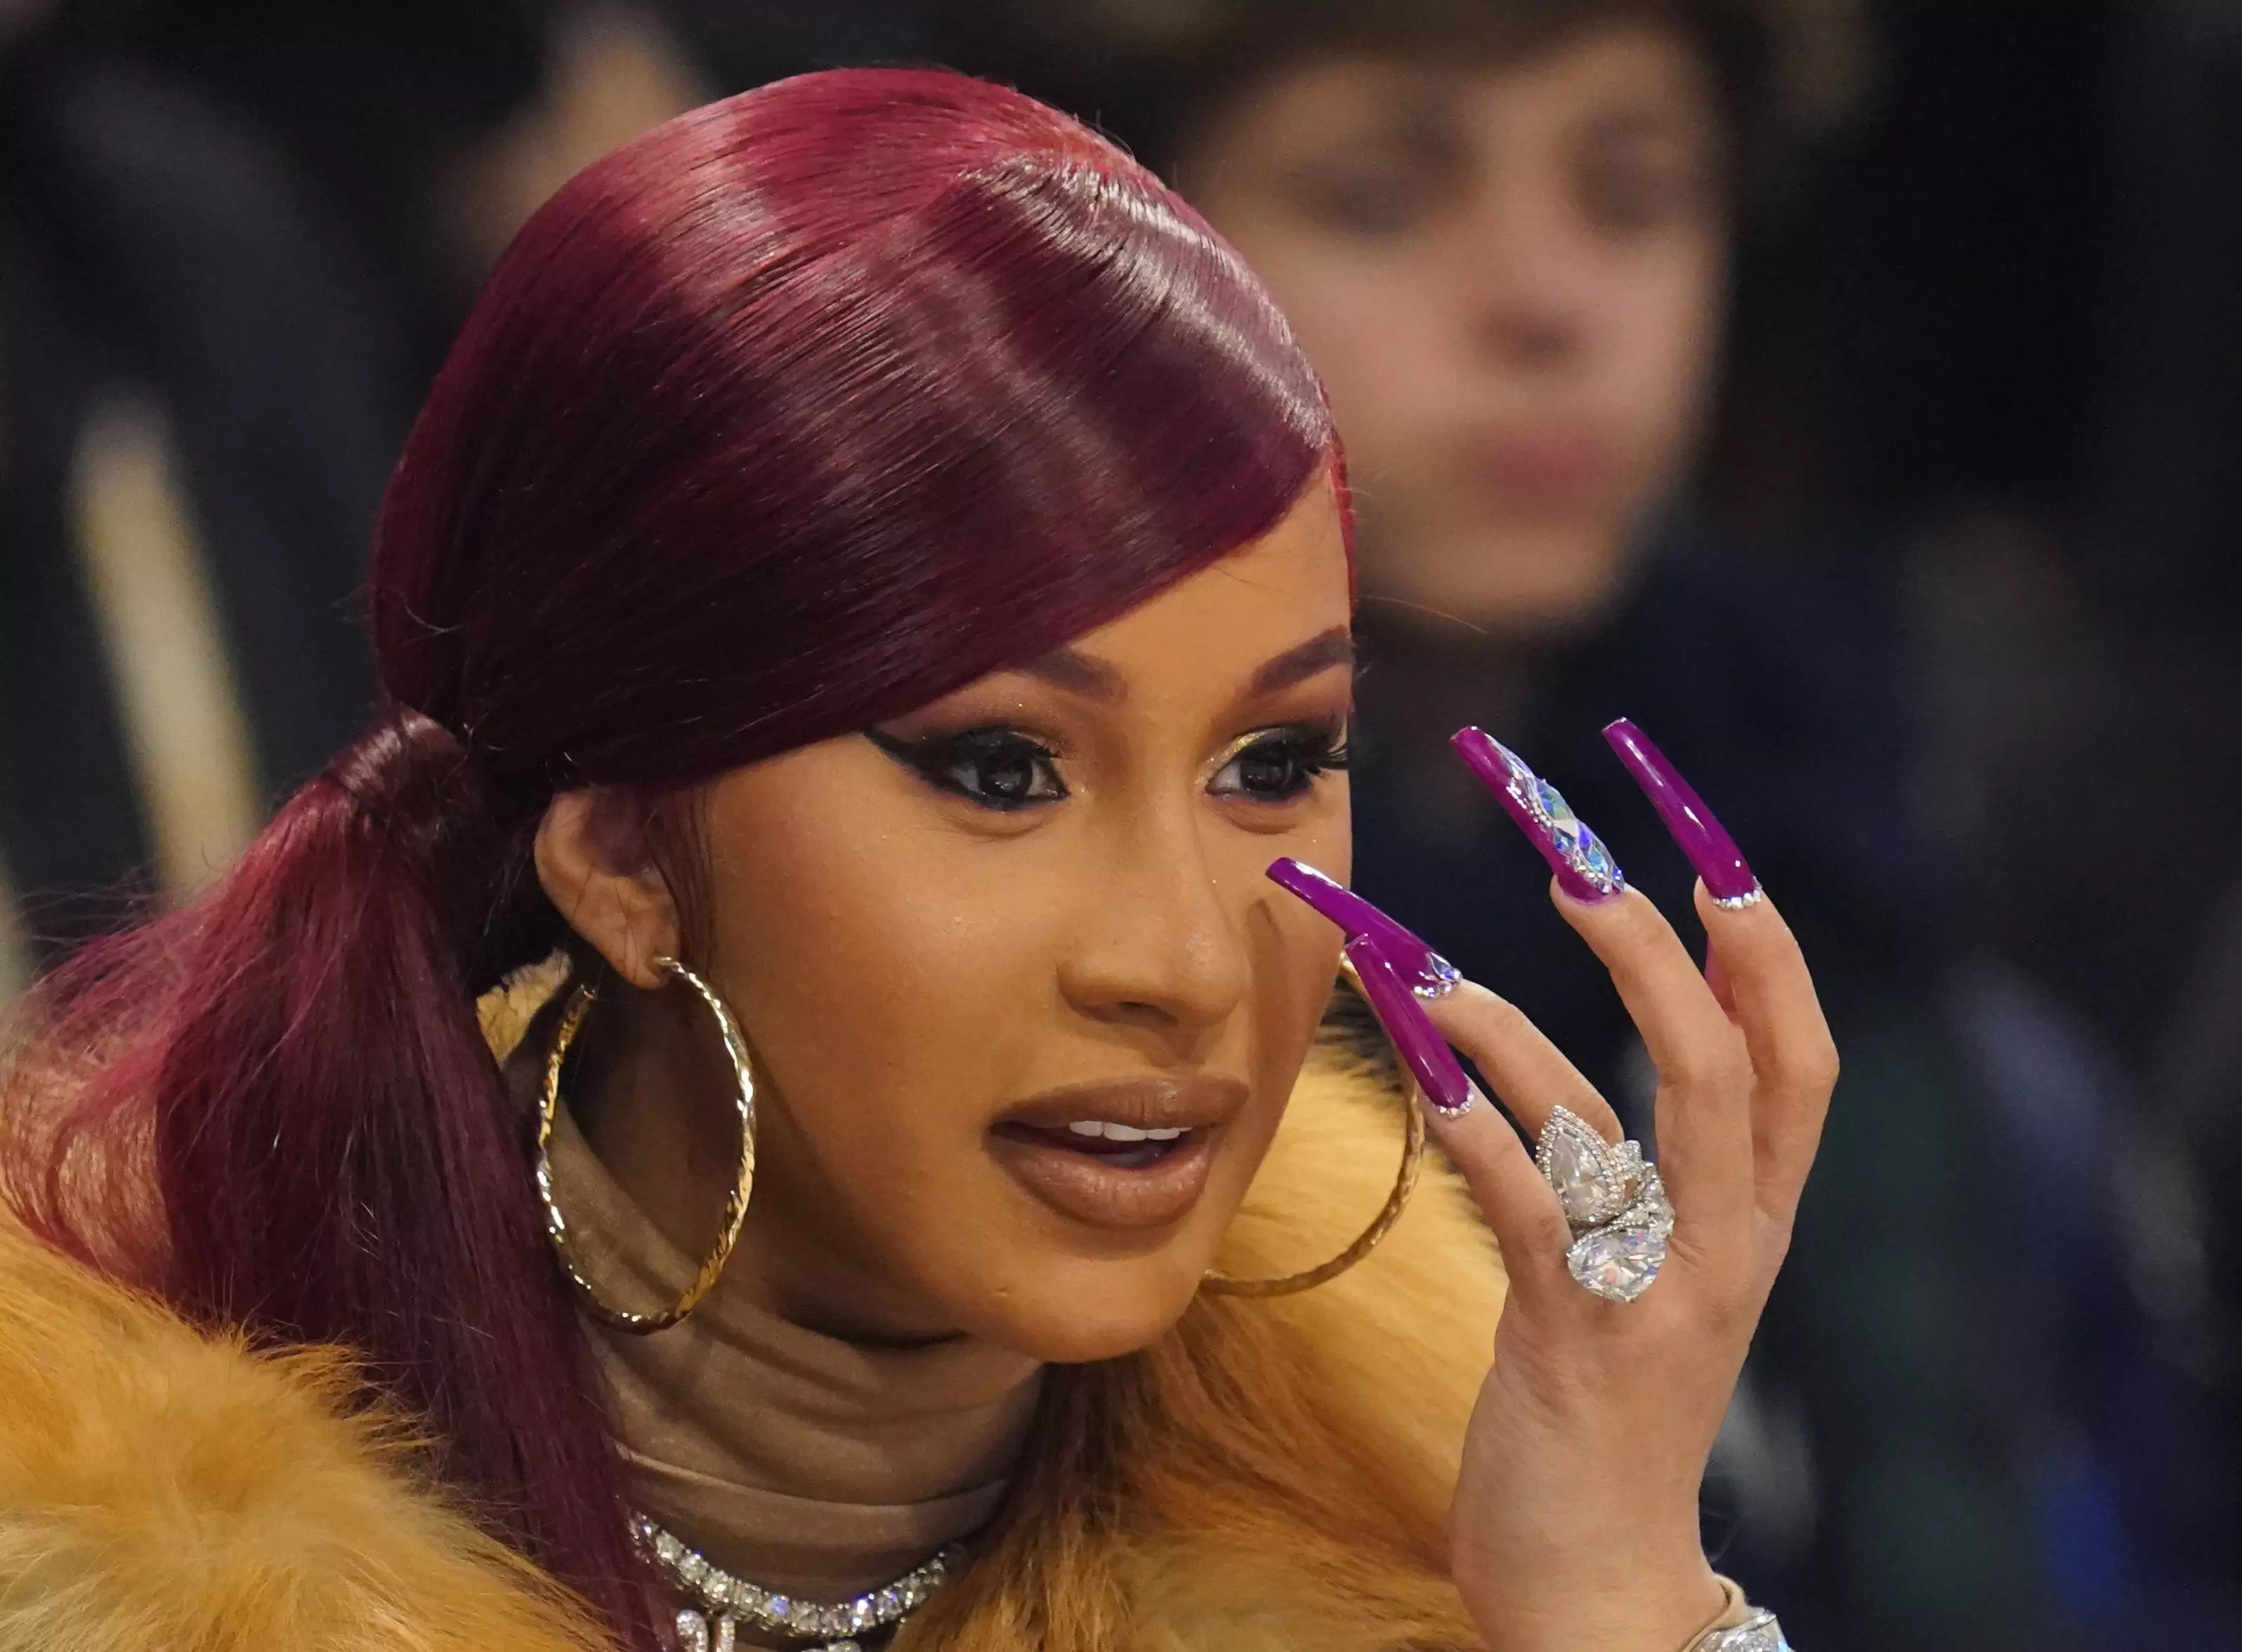 Cardi B has posted a video of her mock crying over not being able to go to a restaurant due to coronavirus lockdown.